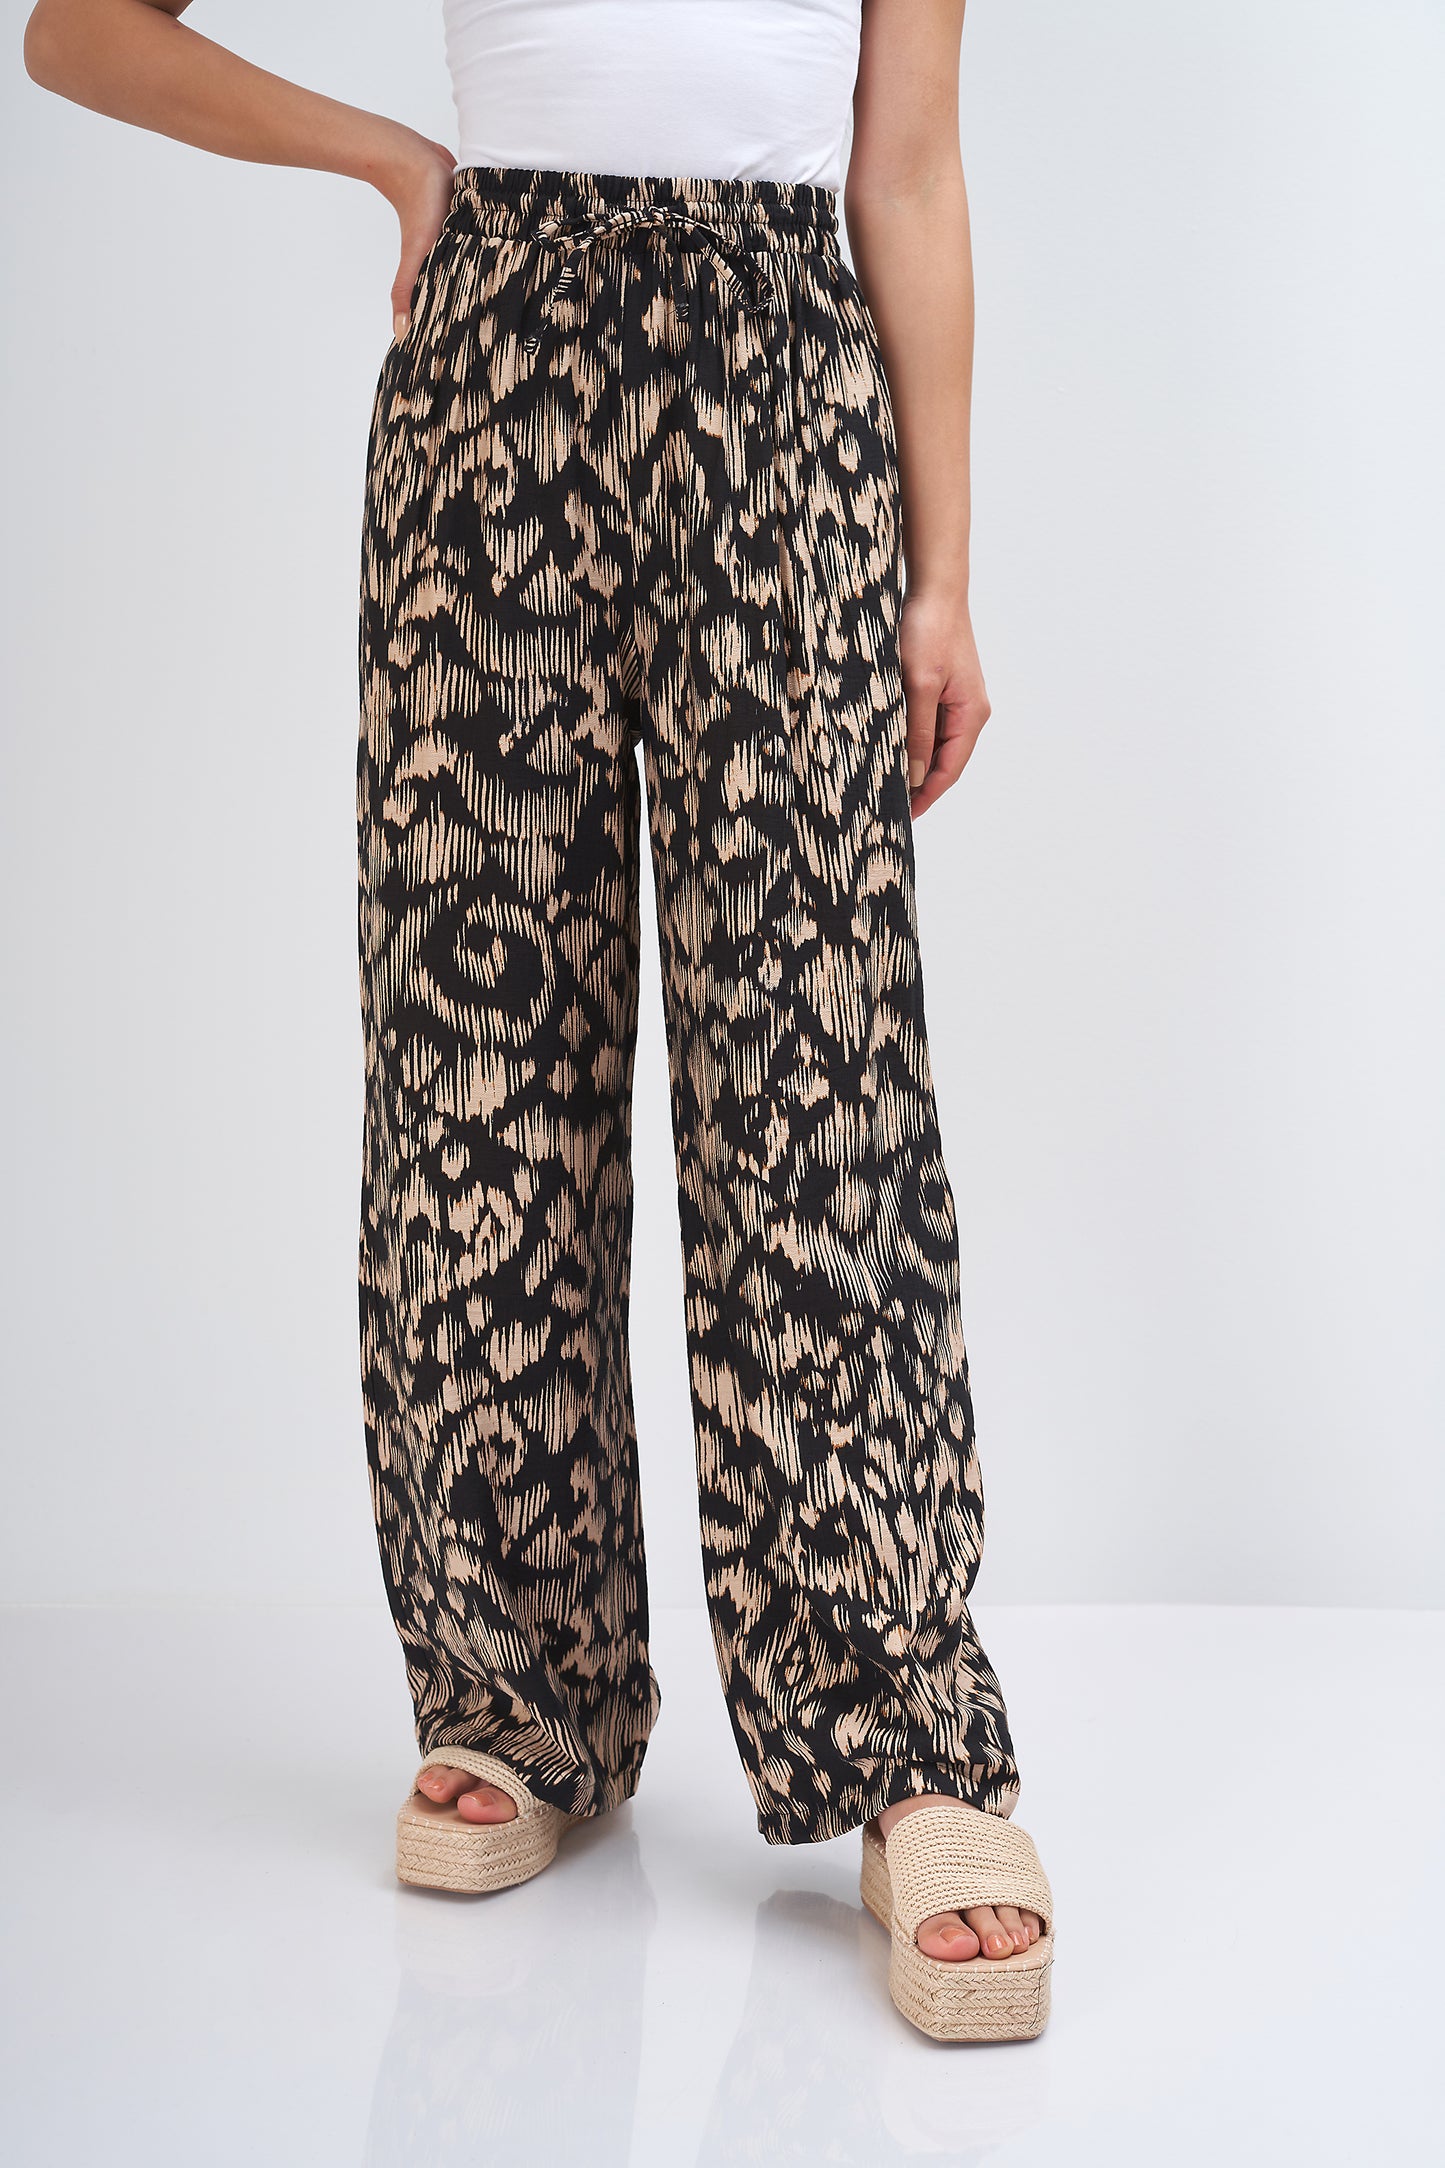 Printed Trouser - (with-patterned) designs